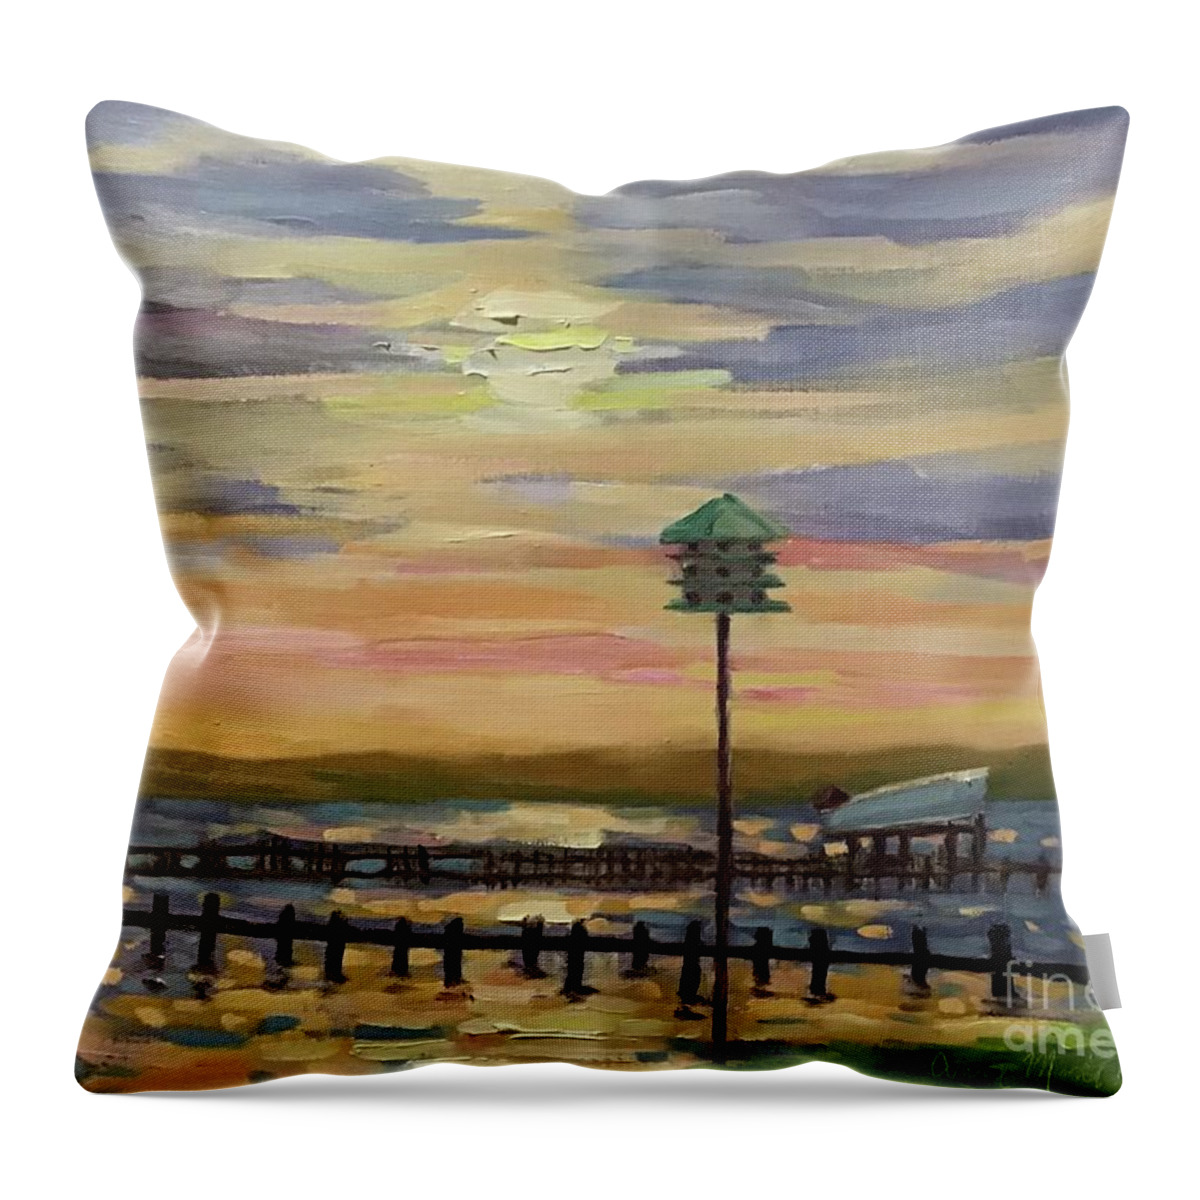 Sunset Throw Pillow featuring the painting Outer Banks Sunset by Anne Marie Brown